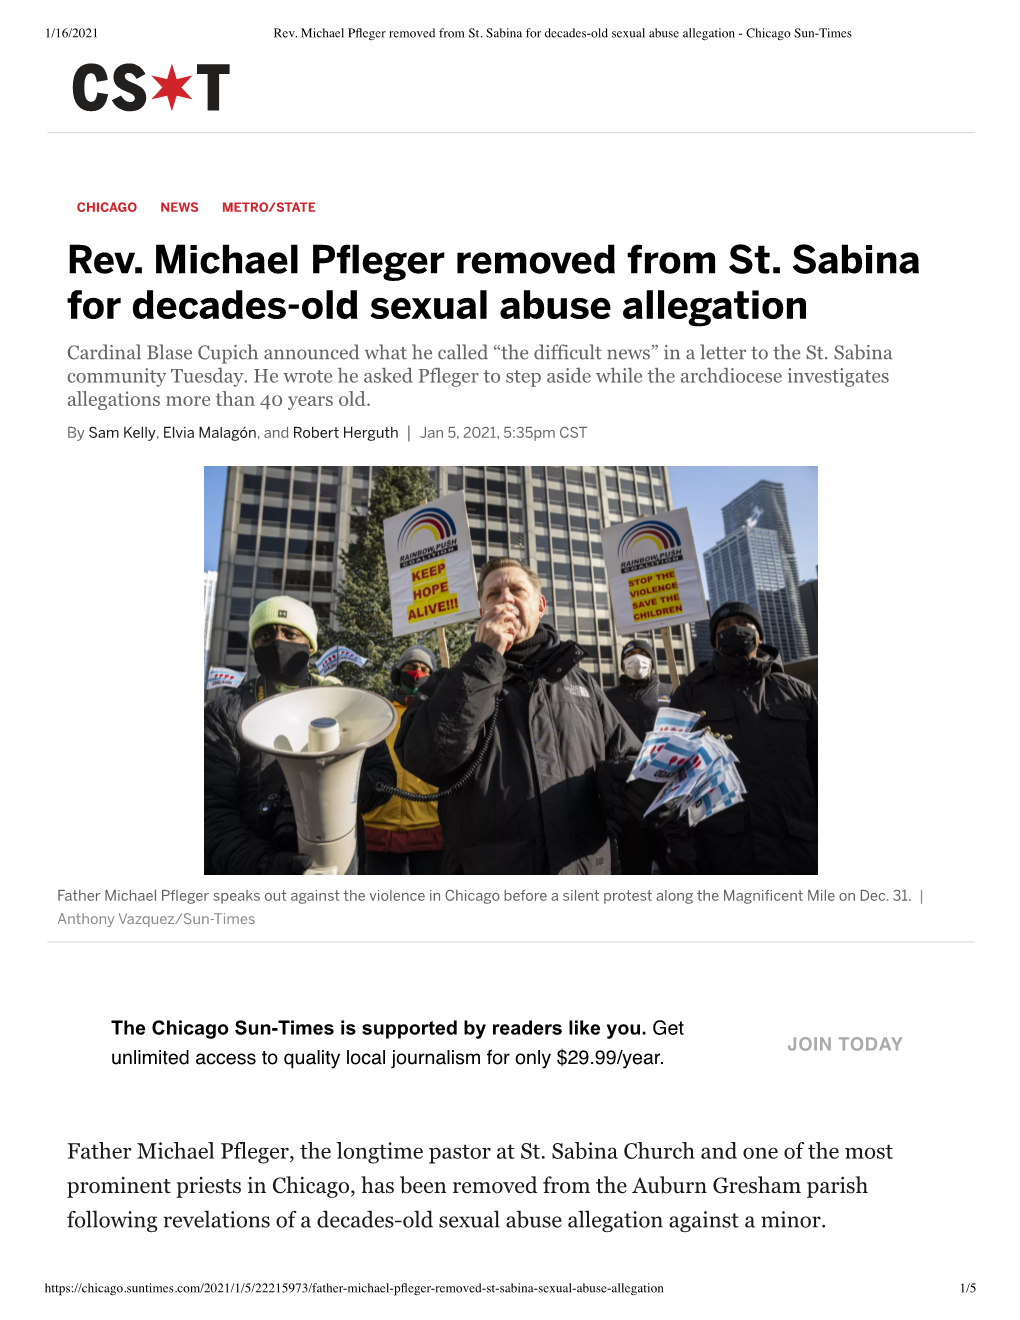 Rev. Michael P Eger Removed from St. Sabina for Decades-Old Sexual Abuse Allegation